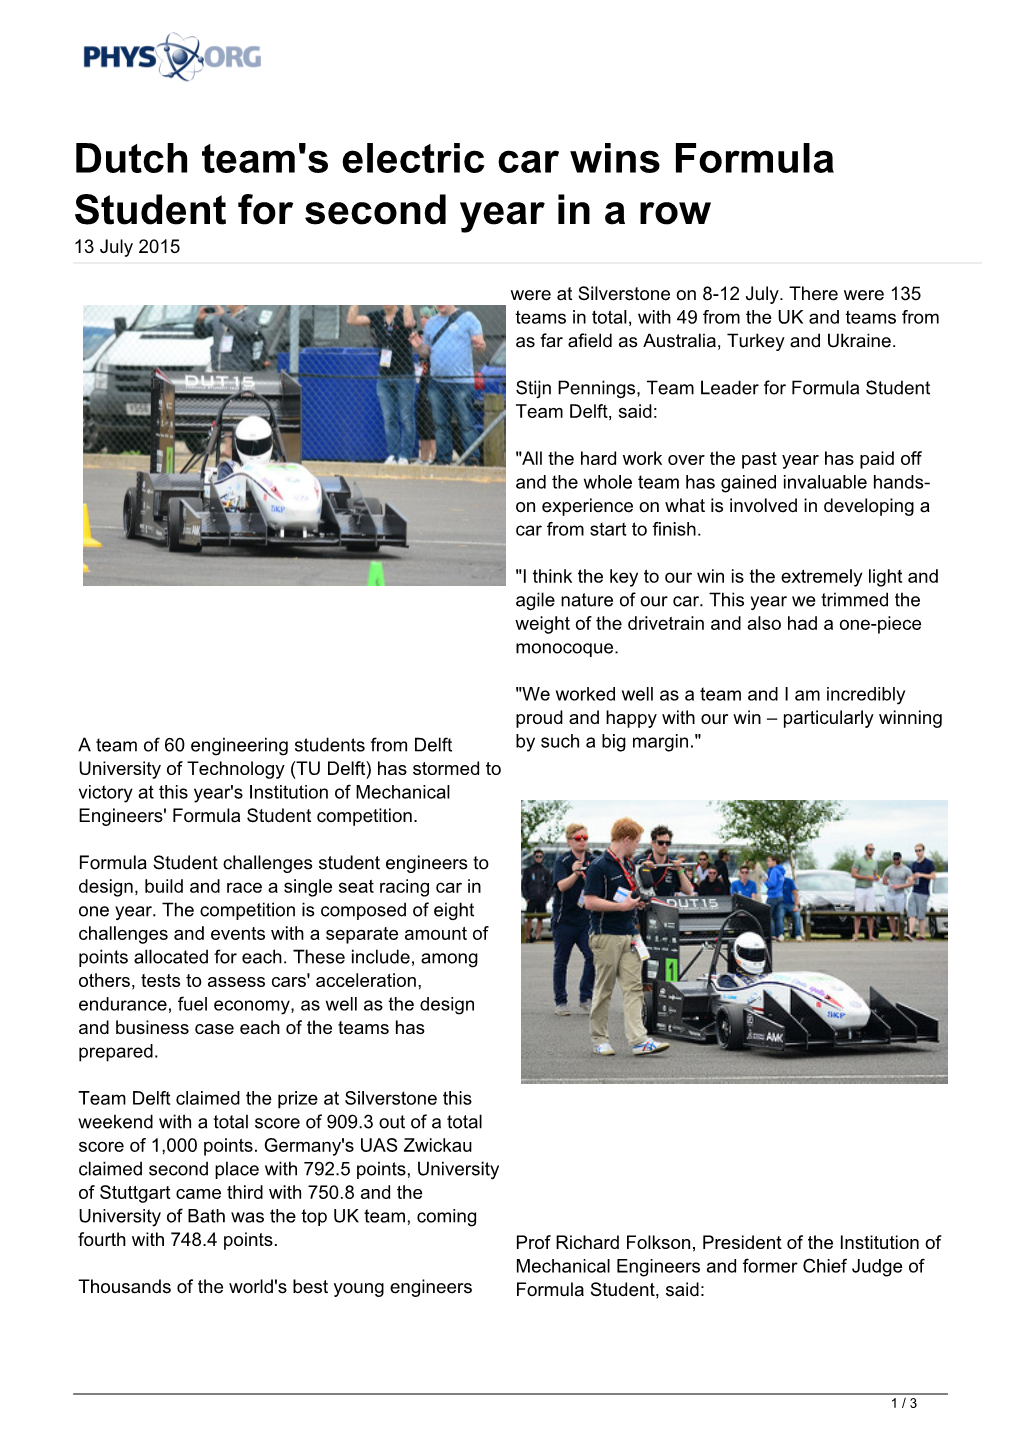 Dutch Team's Electric Car Wins Formula Student for Second Year in a Row 13 July 2015